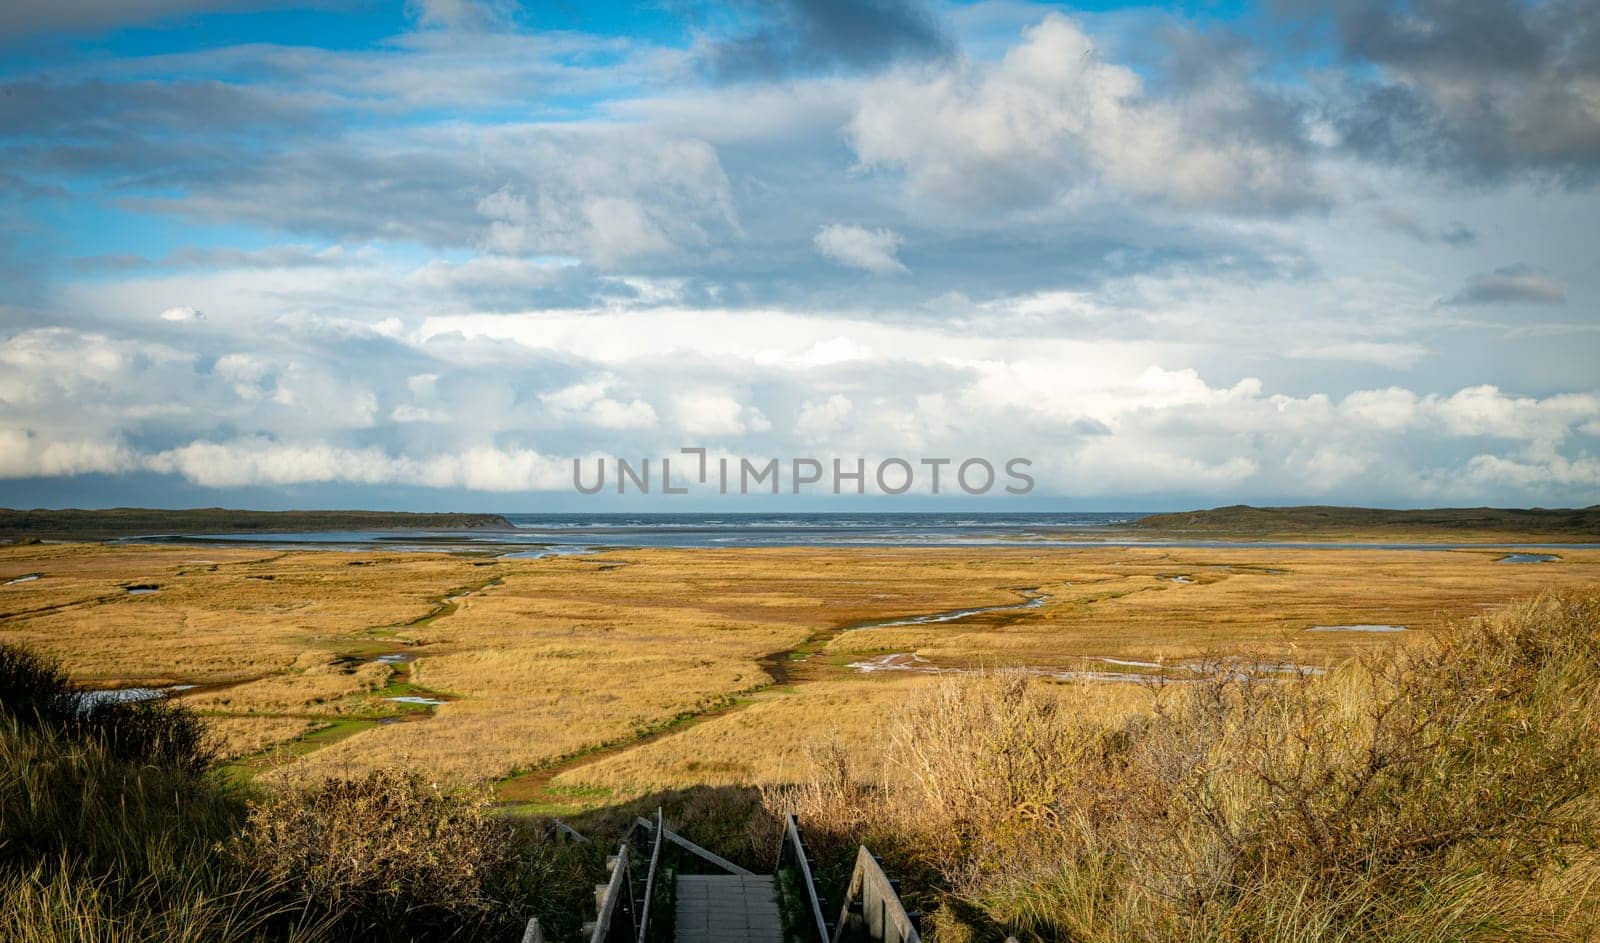 the slufter nature area of the island texel by compuinfoto